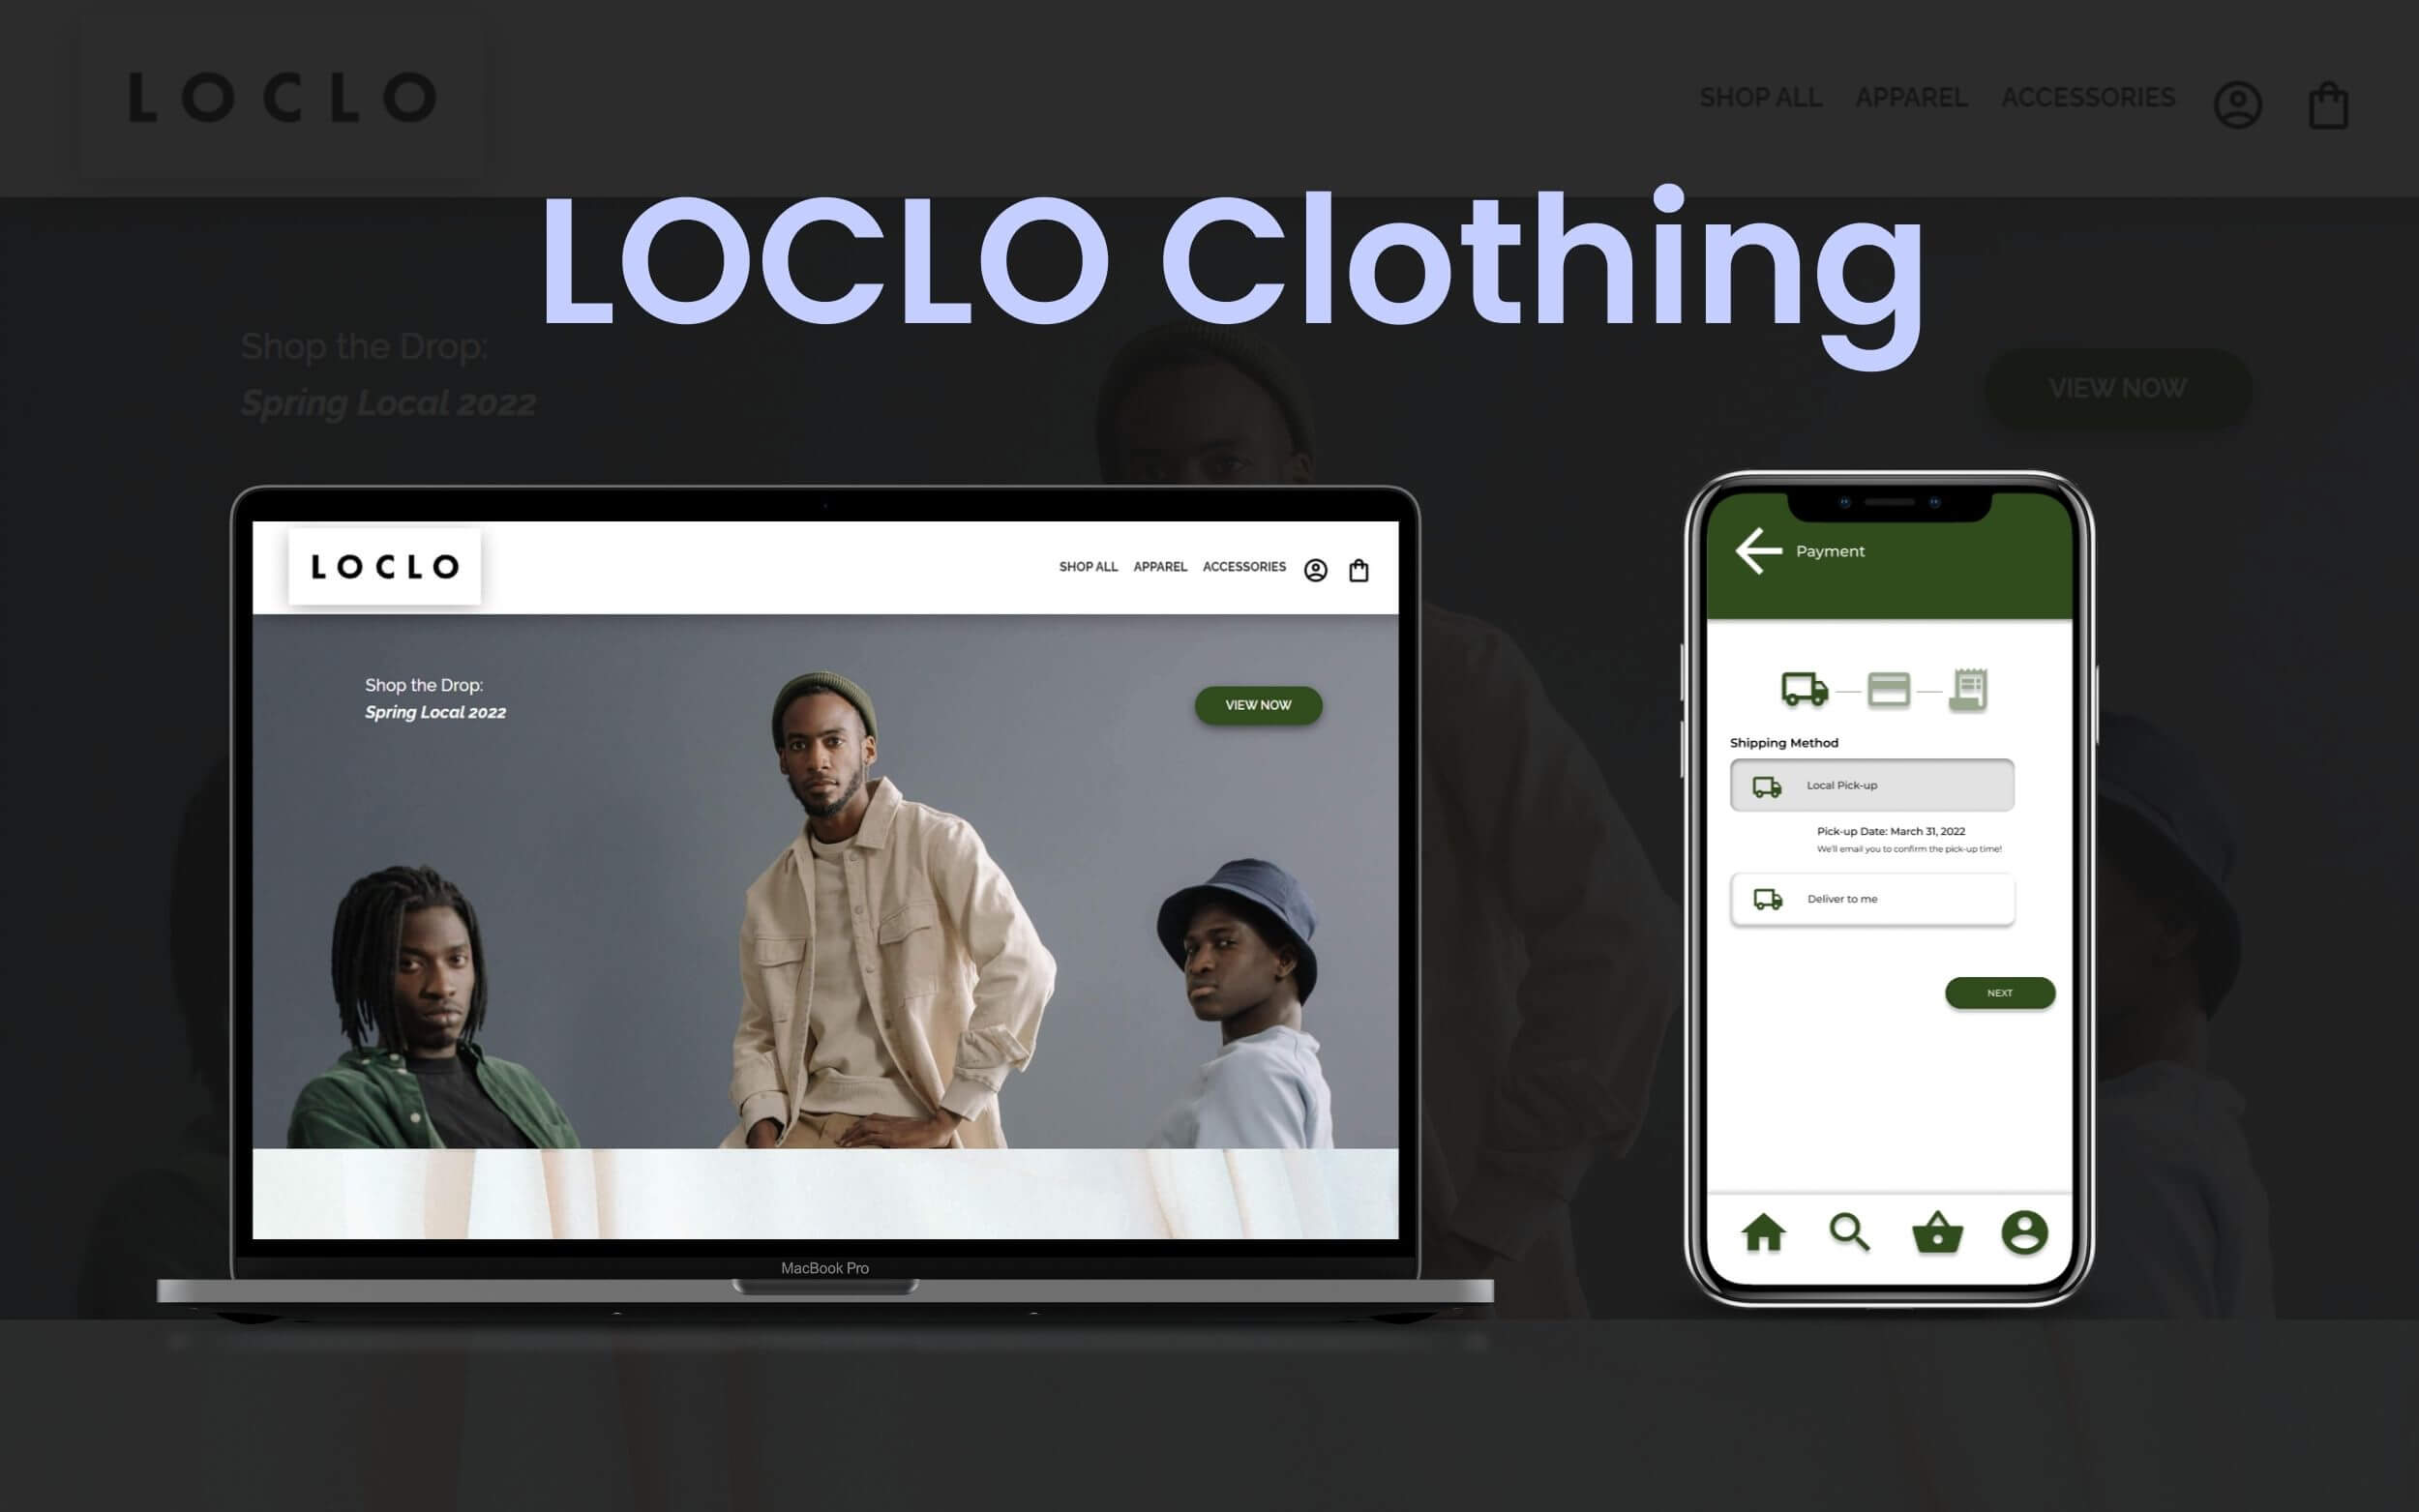 Cover Photo of LOCLO Clothing text with two screenshots below of LOCLO's home page in desktop and mobile screen sizes.